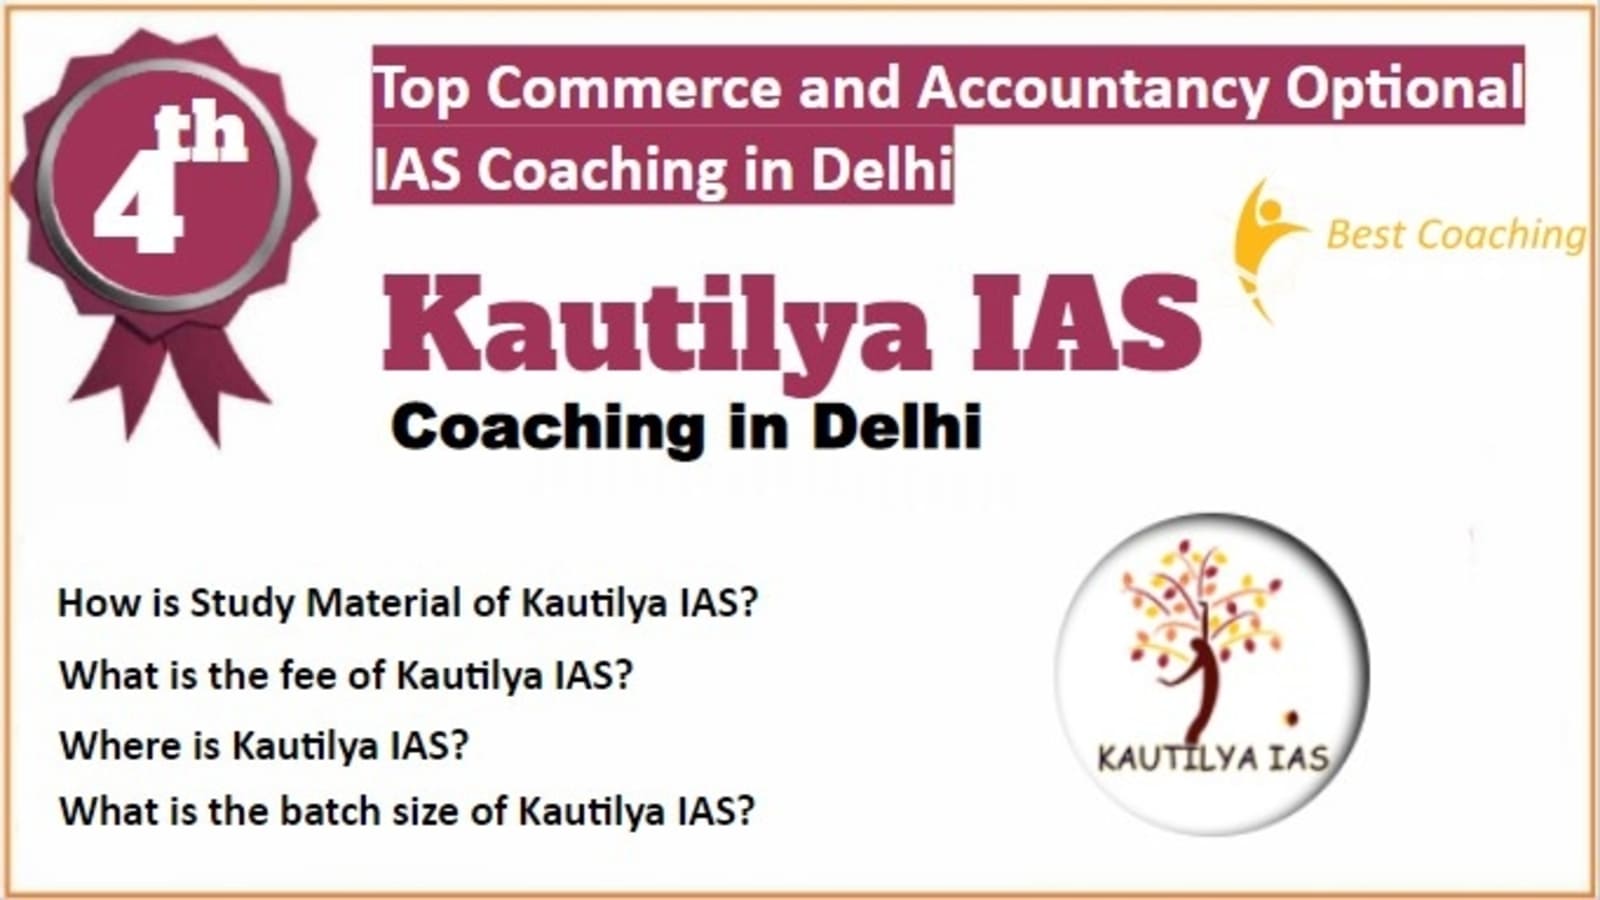 Rank 4 Best Commerce and Accountancy Optional IAS Coaching in Delhi